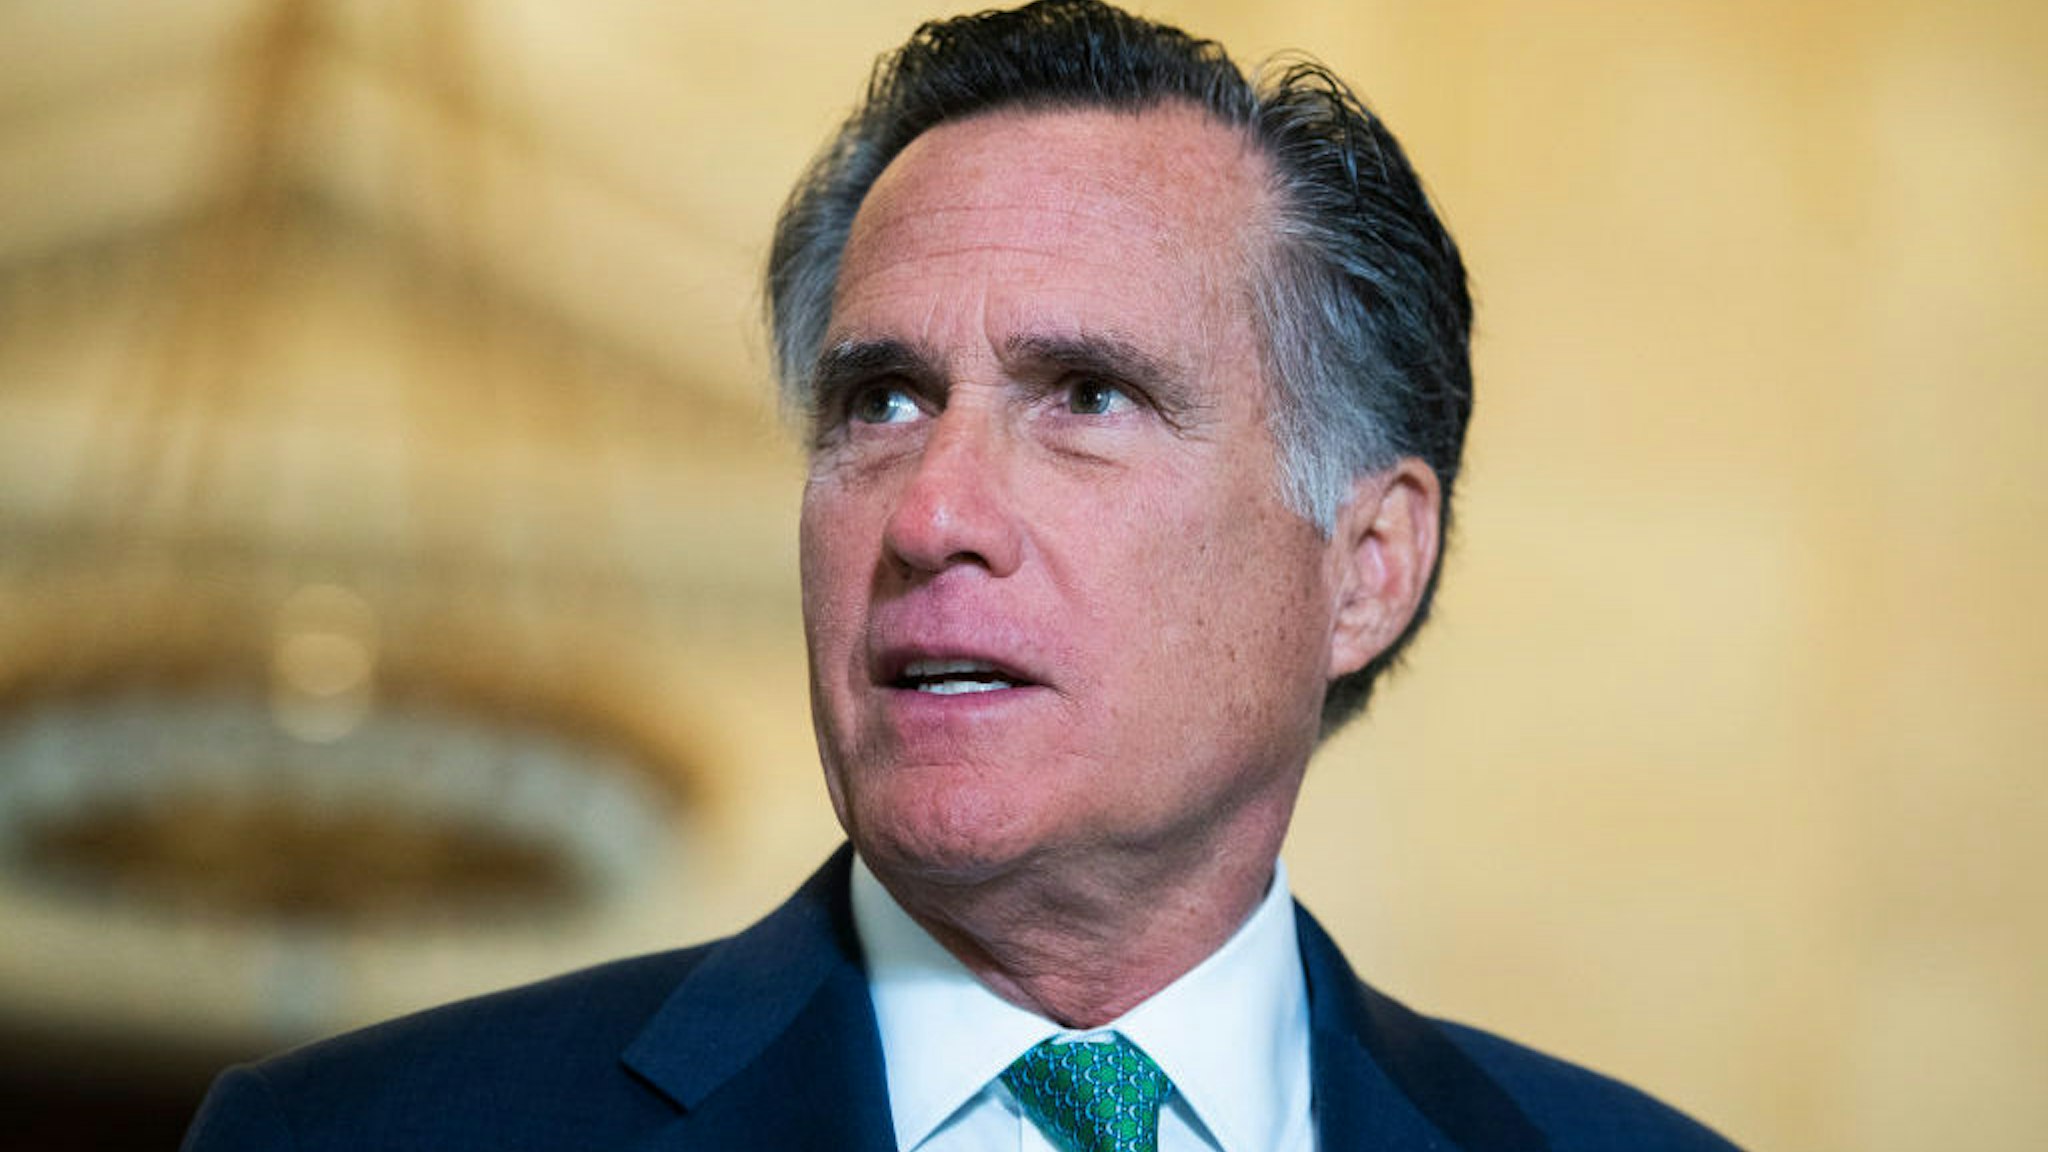 UNITED STATES - MARCH 17: Sen. Mitt Romney, R-Utah, leaves the Senate Republican Policy luncheon in Russell Building on Tuesday, March 17, 2020. Treasury Secretary Steven Mnuchin attended to discuss the coronavirus relief package. (Photo By Tom Williams/CQ Roll Call)